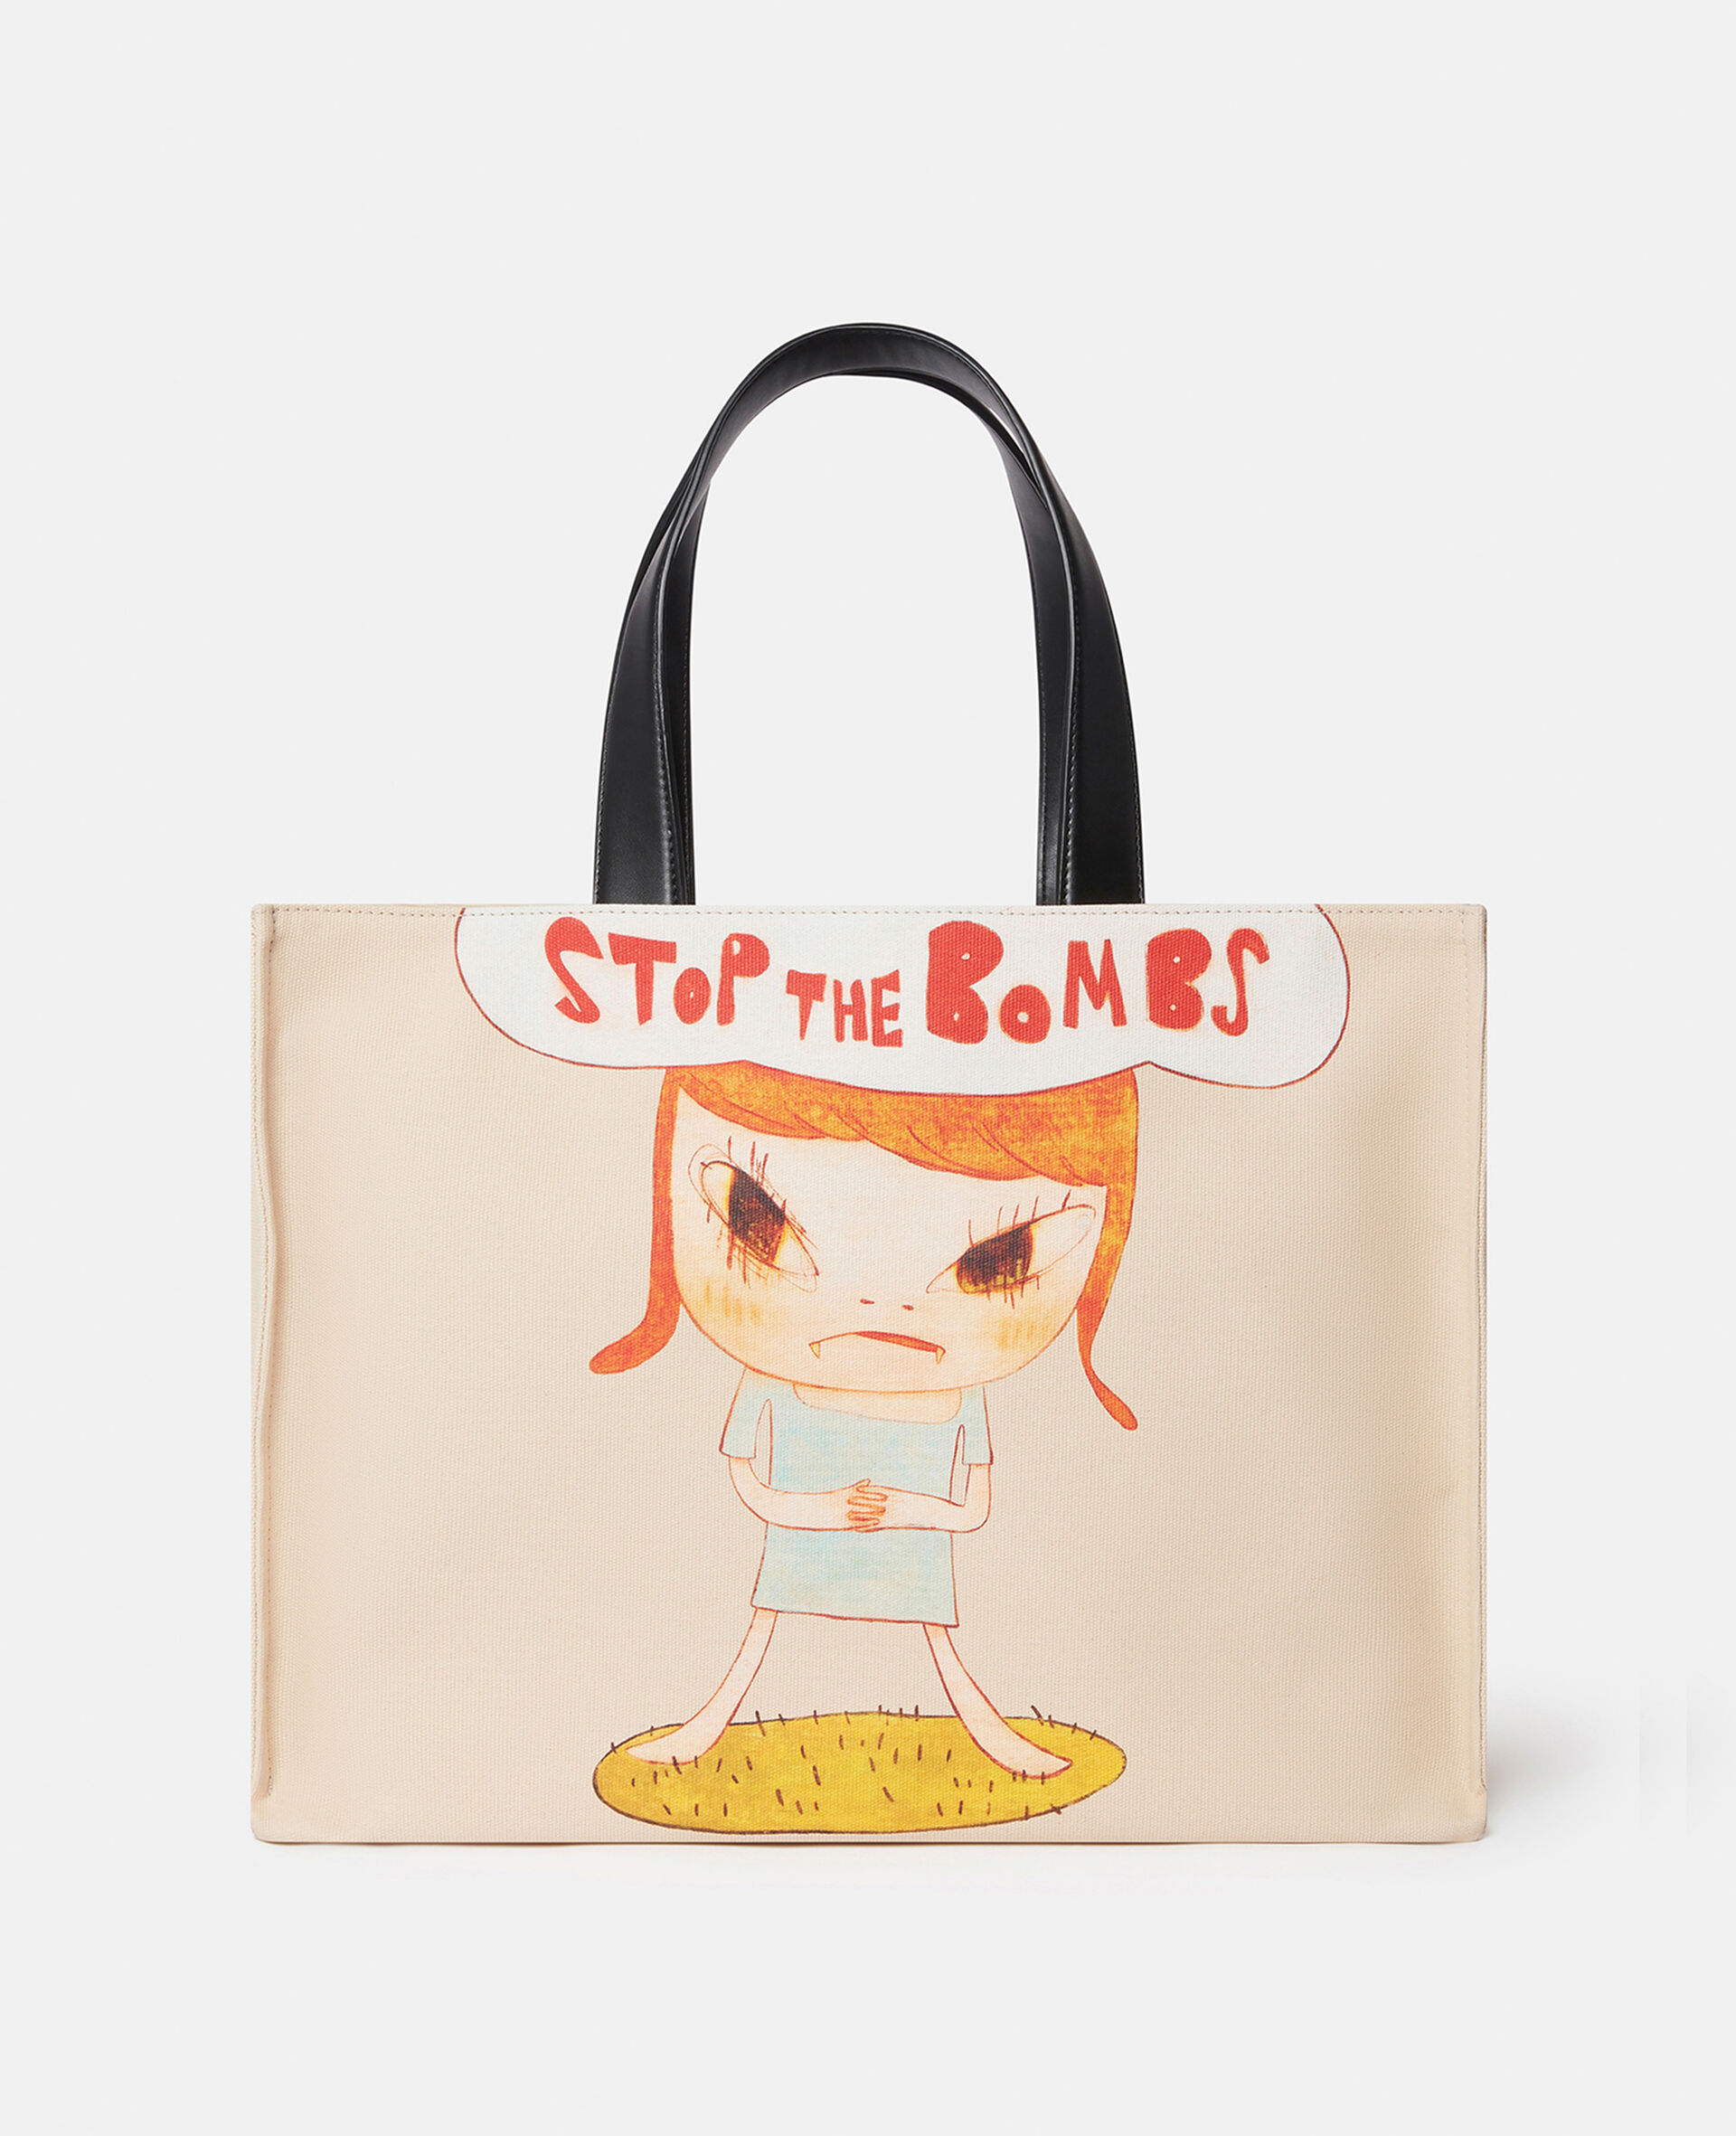 Borsa tote in tela di cotone con stampa Stop the Bombs-Beige-large image number 0